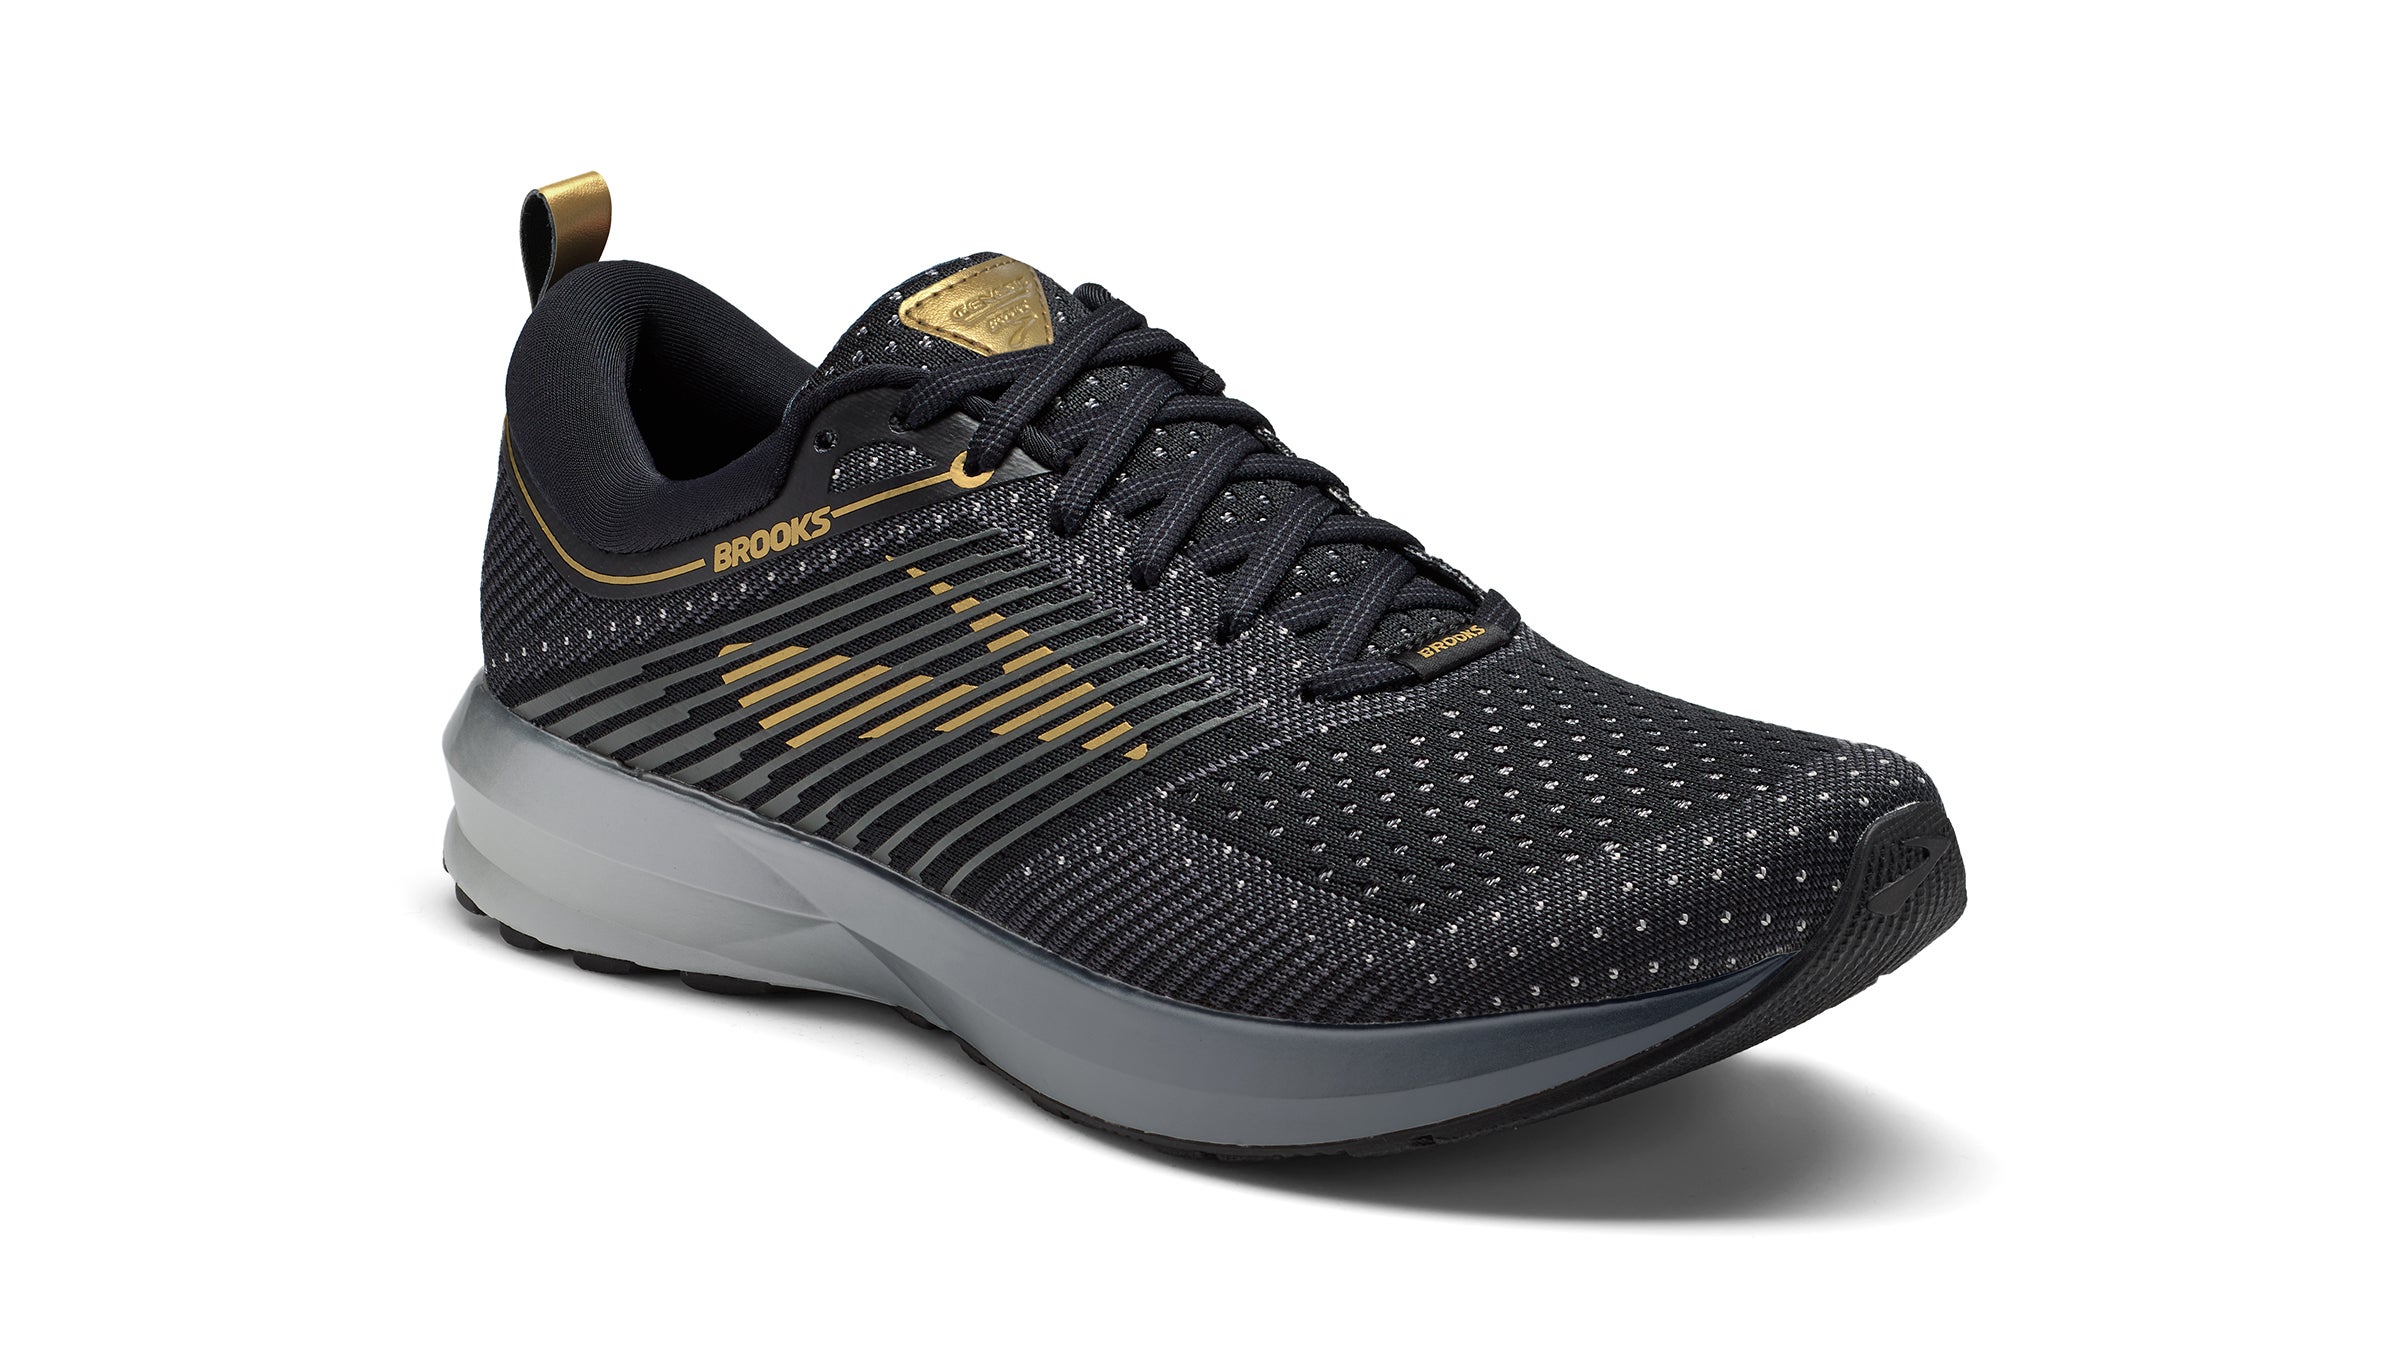 Decathlon Unveils New Sports Shoe in Collaboration with HP and